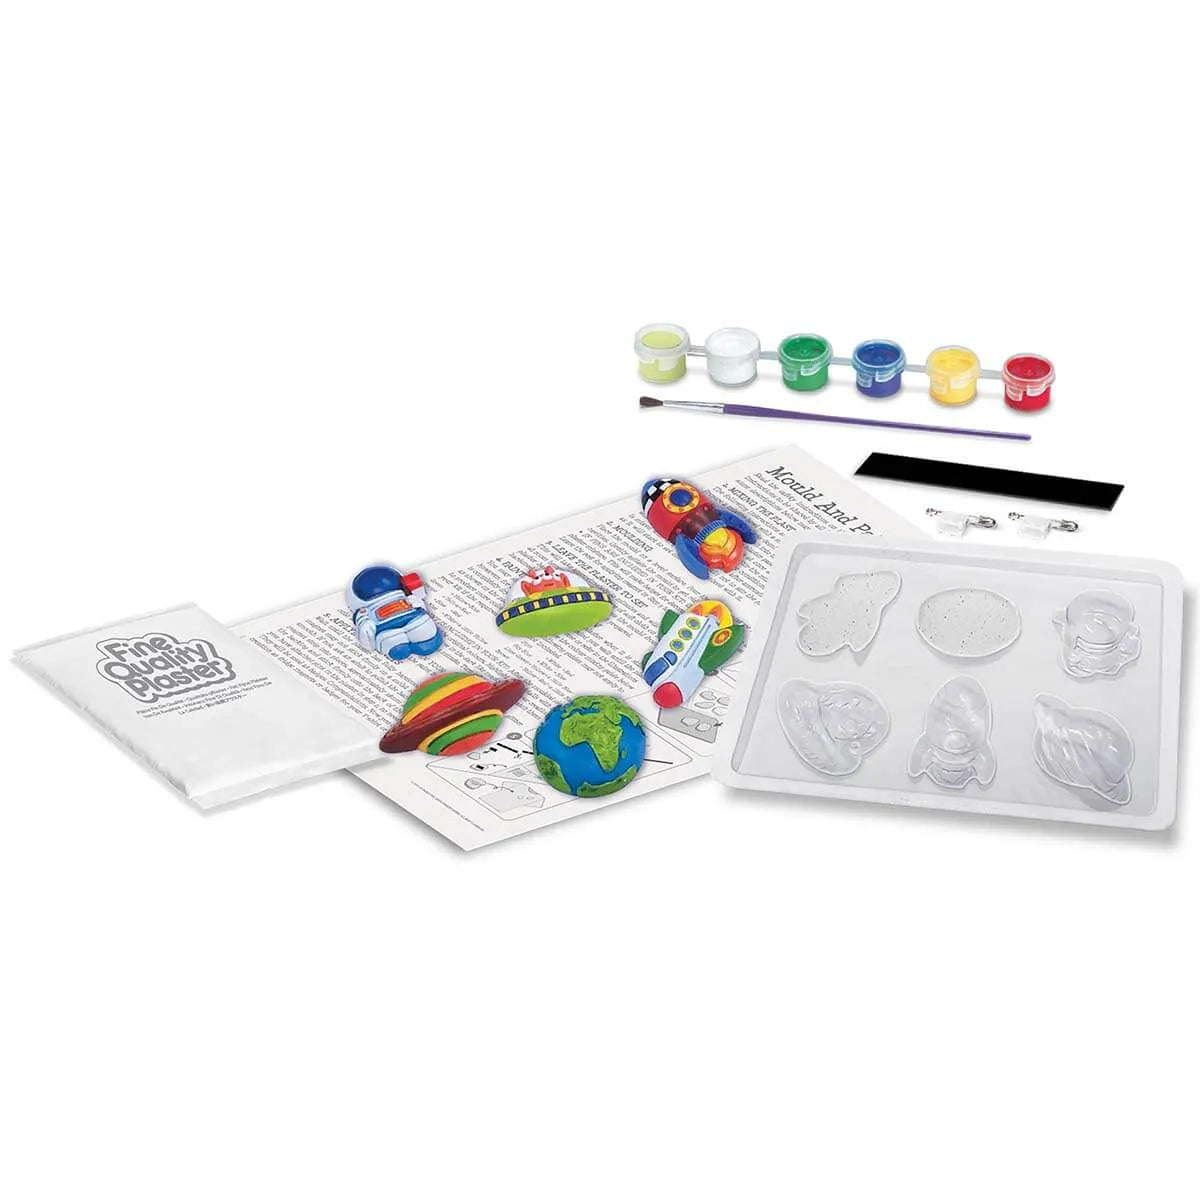 mould and paint set for children - shop craft set for children at The Toy Room - great gizmos